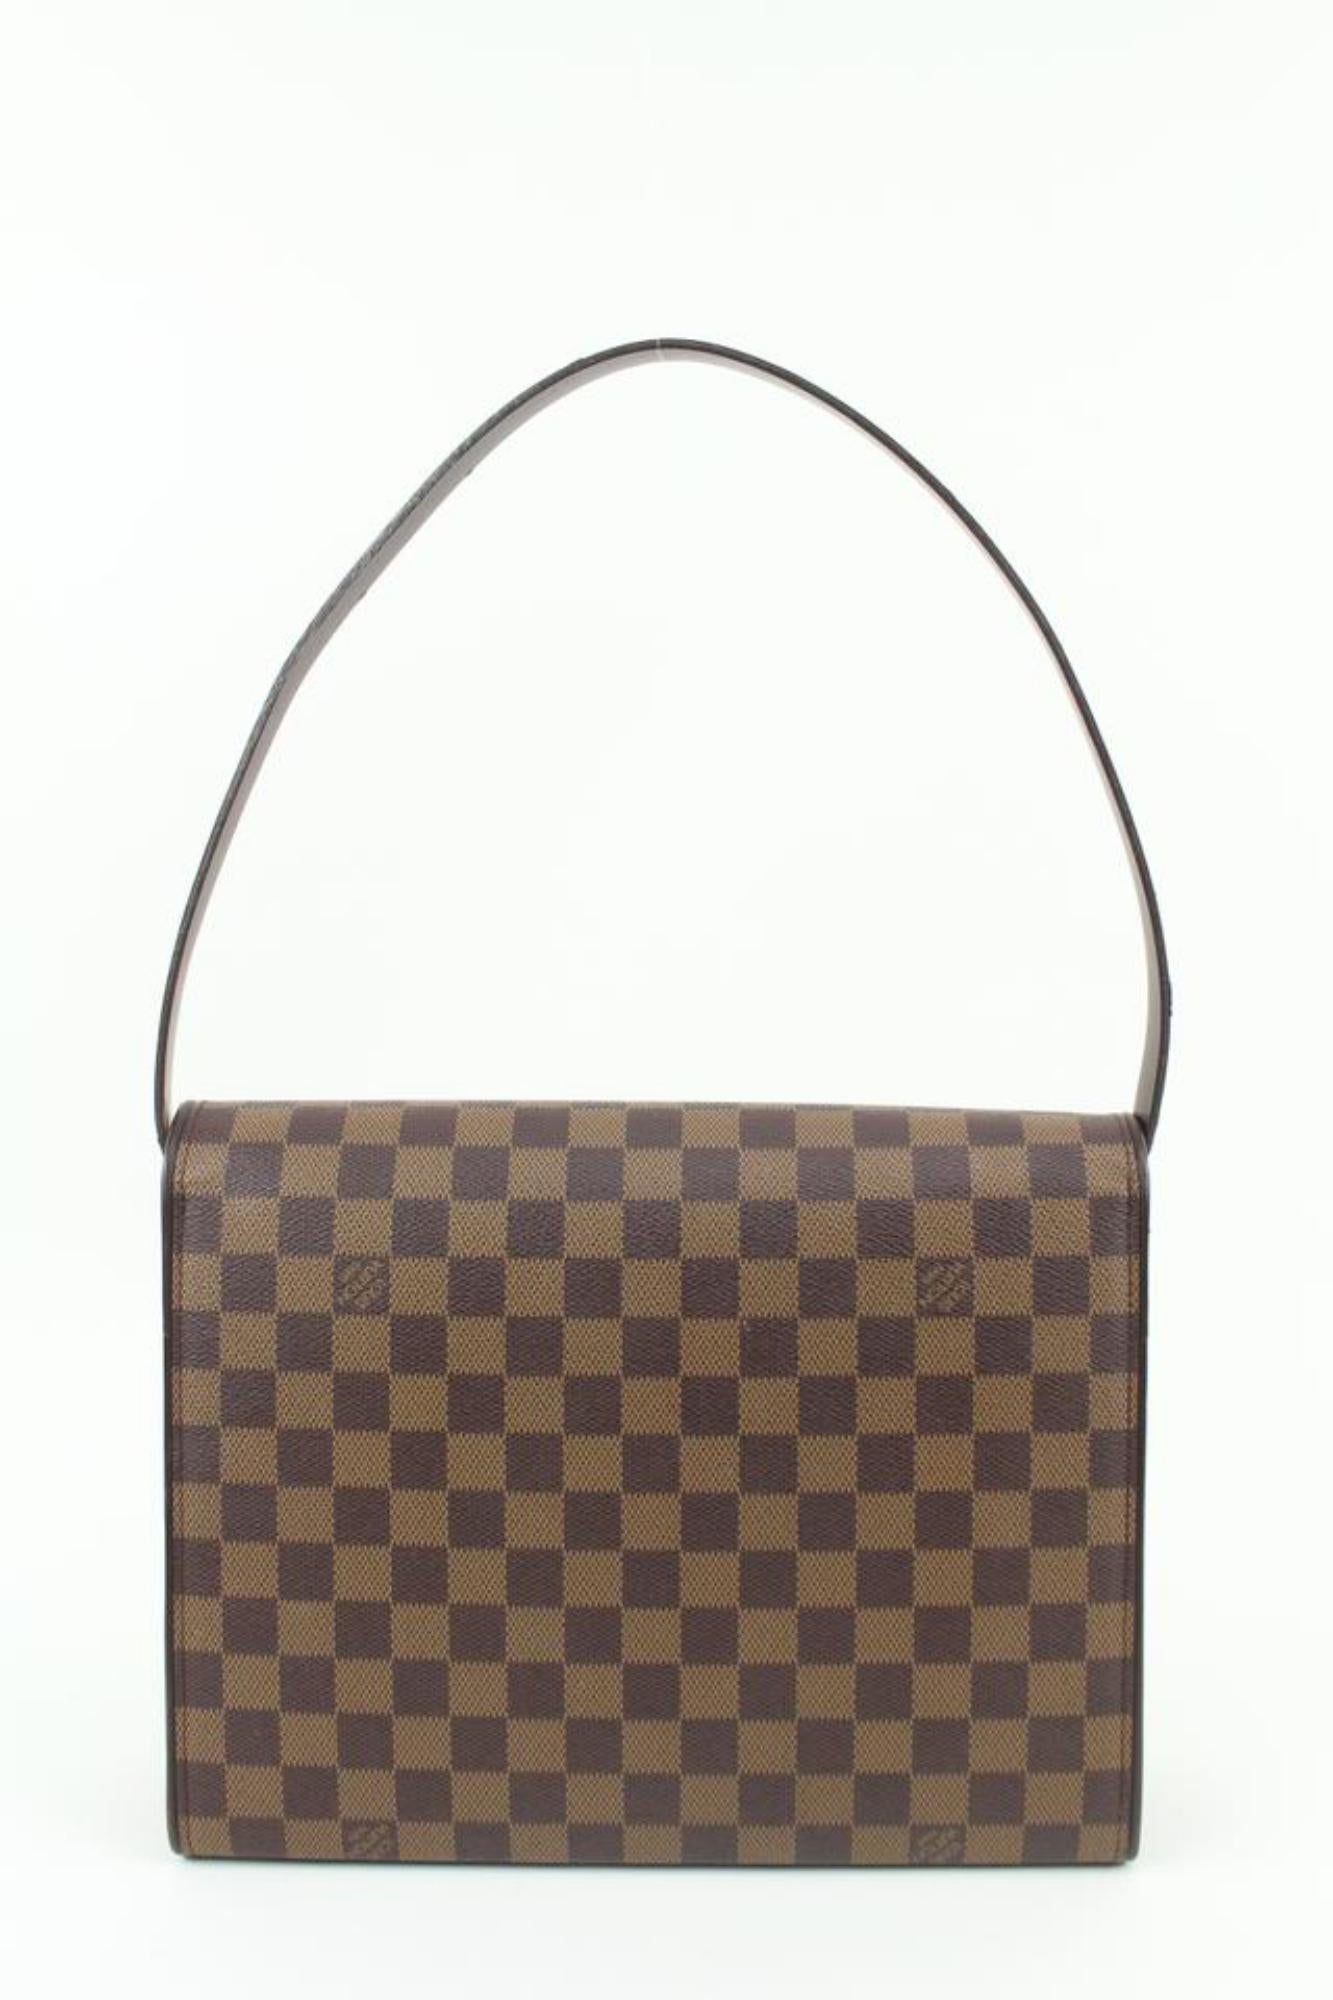 Louis Vuitton Discontinued Damier Ebene Tribeca Carre Flap Shoulder Bag 99lv310s In Good Condition For Sale In Dix hills, NY